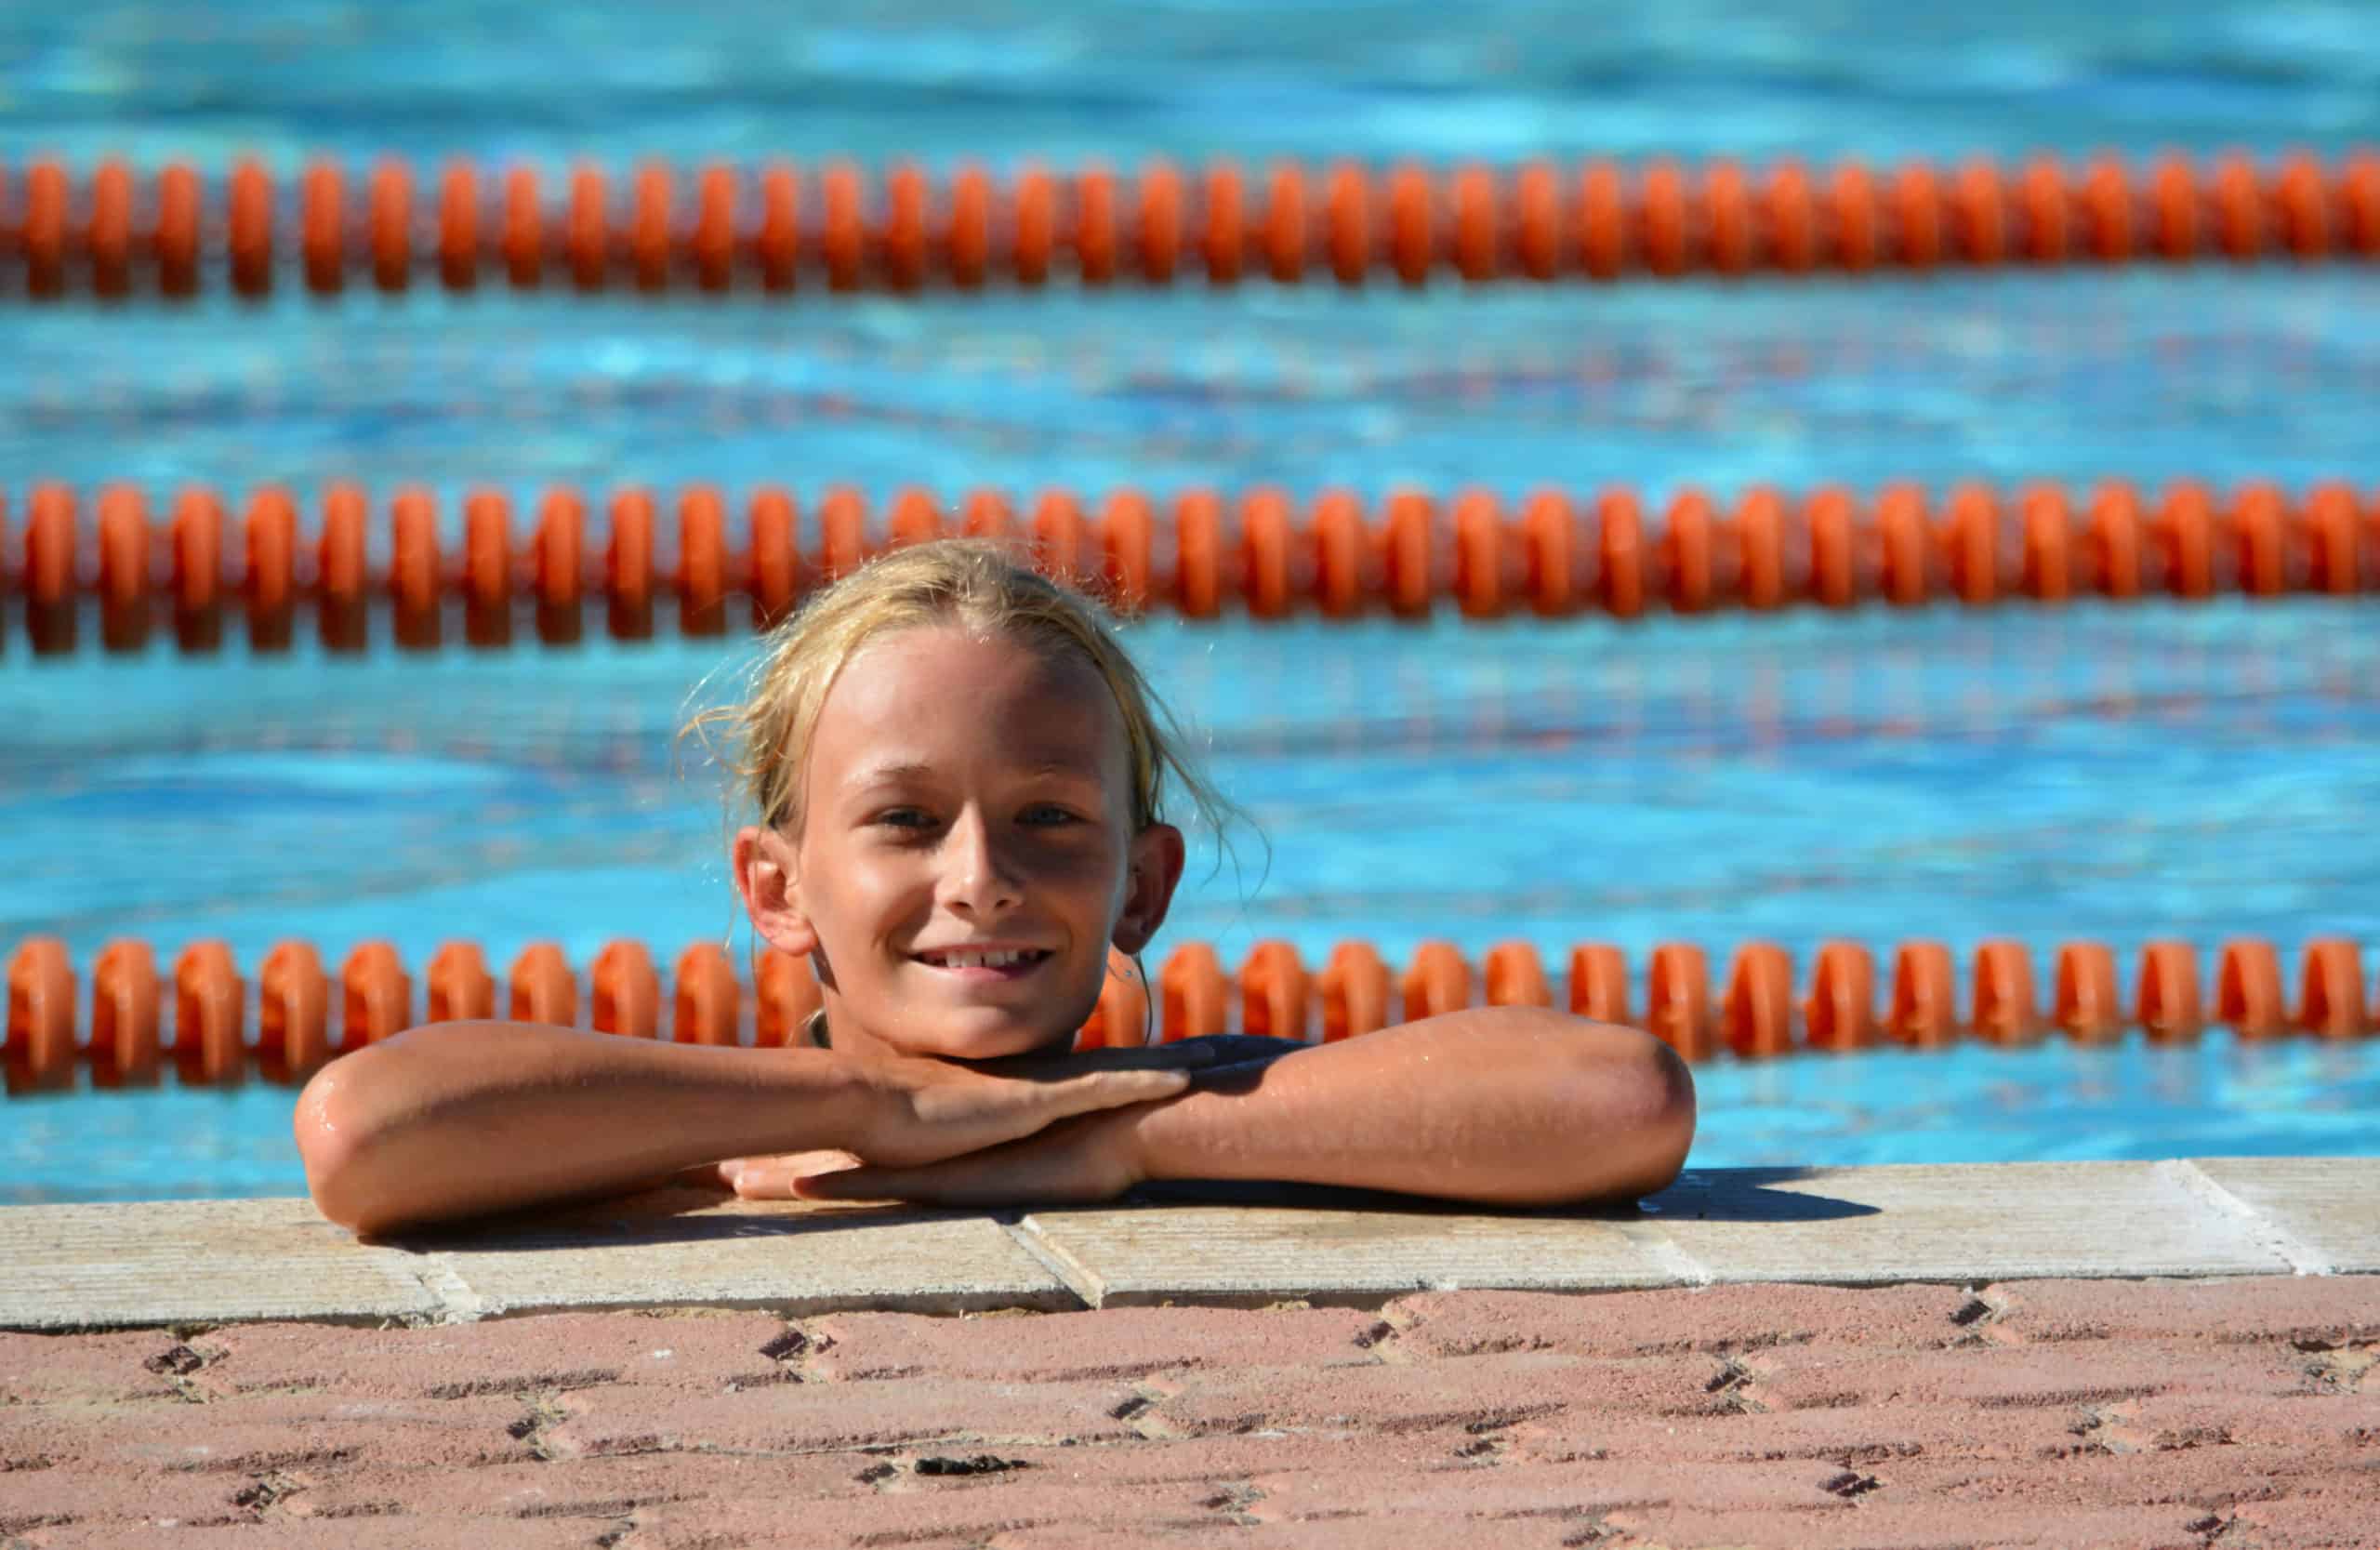 A girl floats in a public swimming pool that has commercial chemical delivery with her arms crossed on the edge. Orange swimming lane lines are in the background.